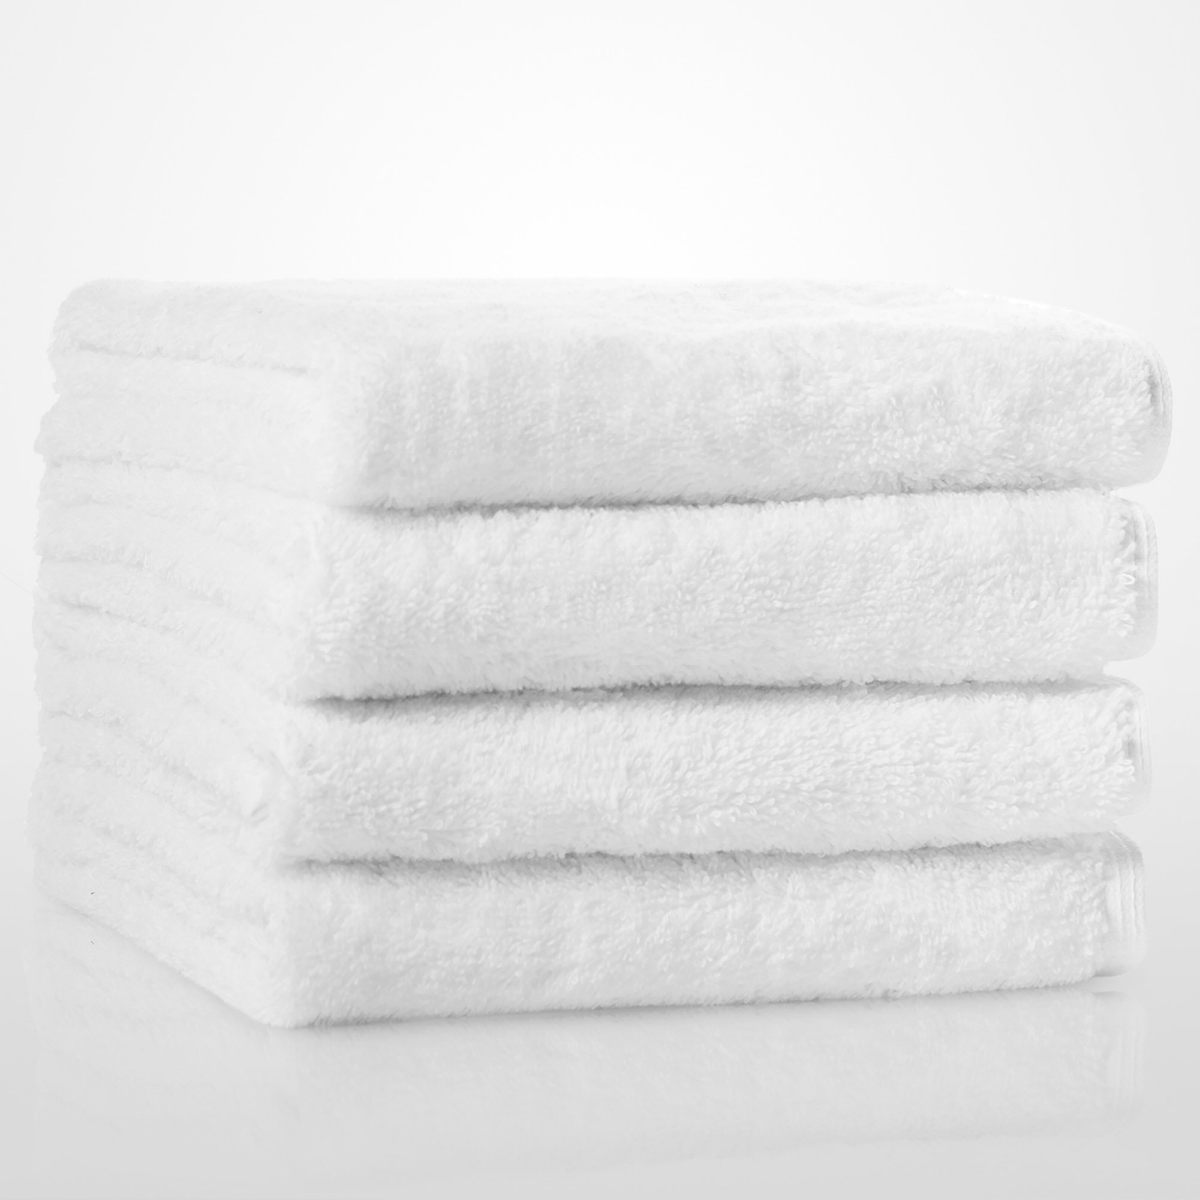 Sweat Towel Buying Guide, Workout Towels